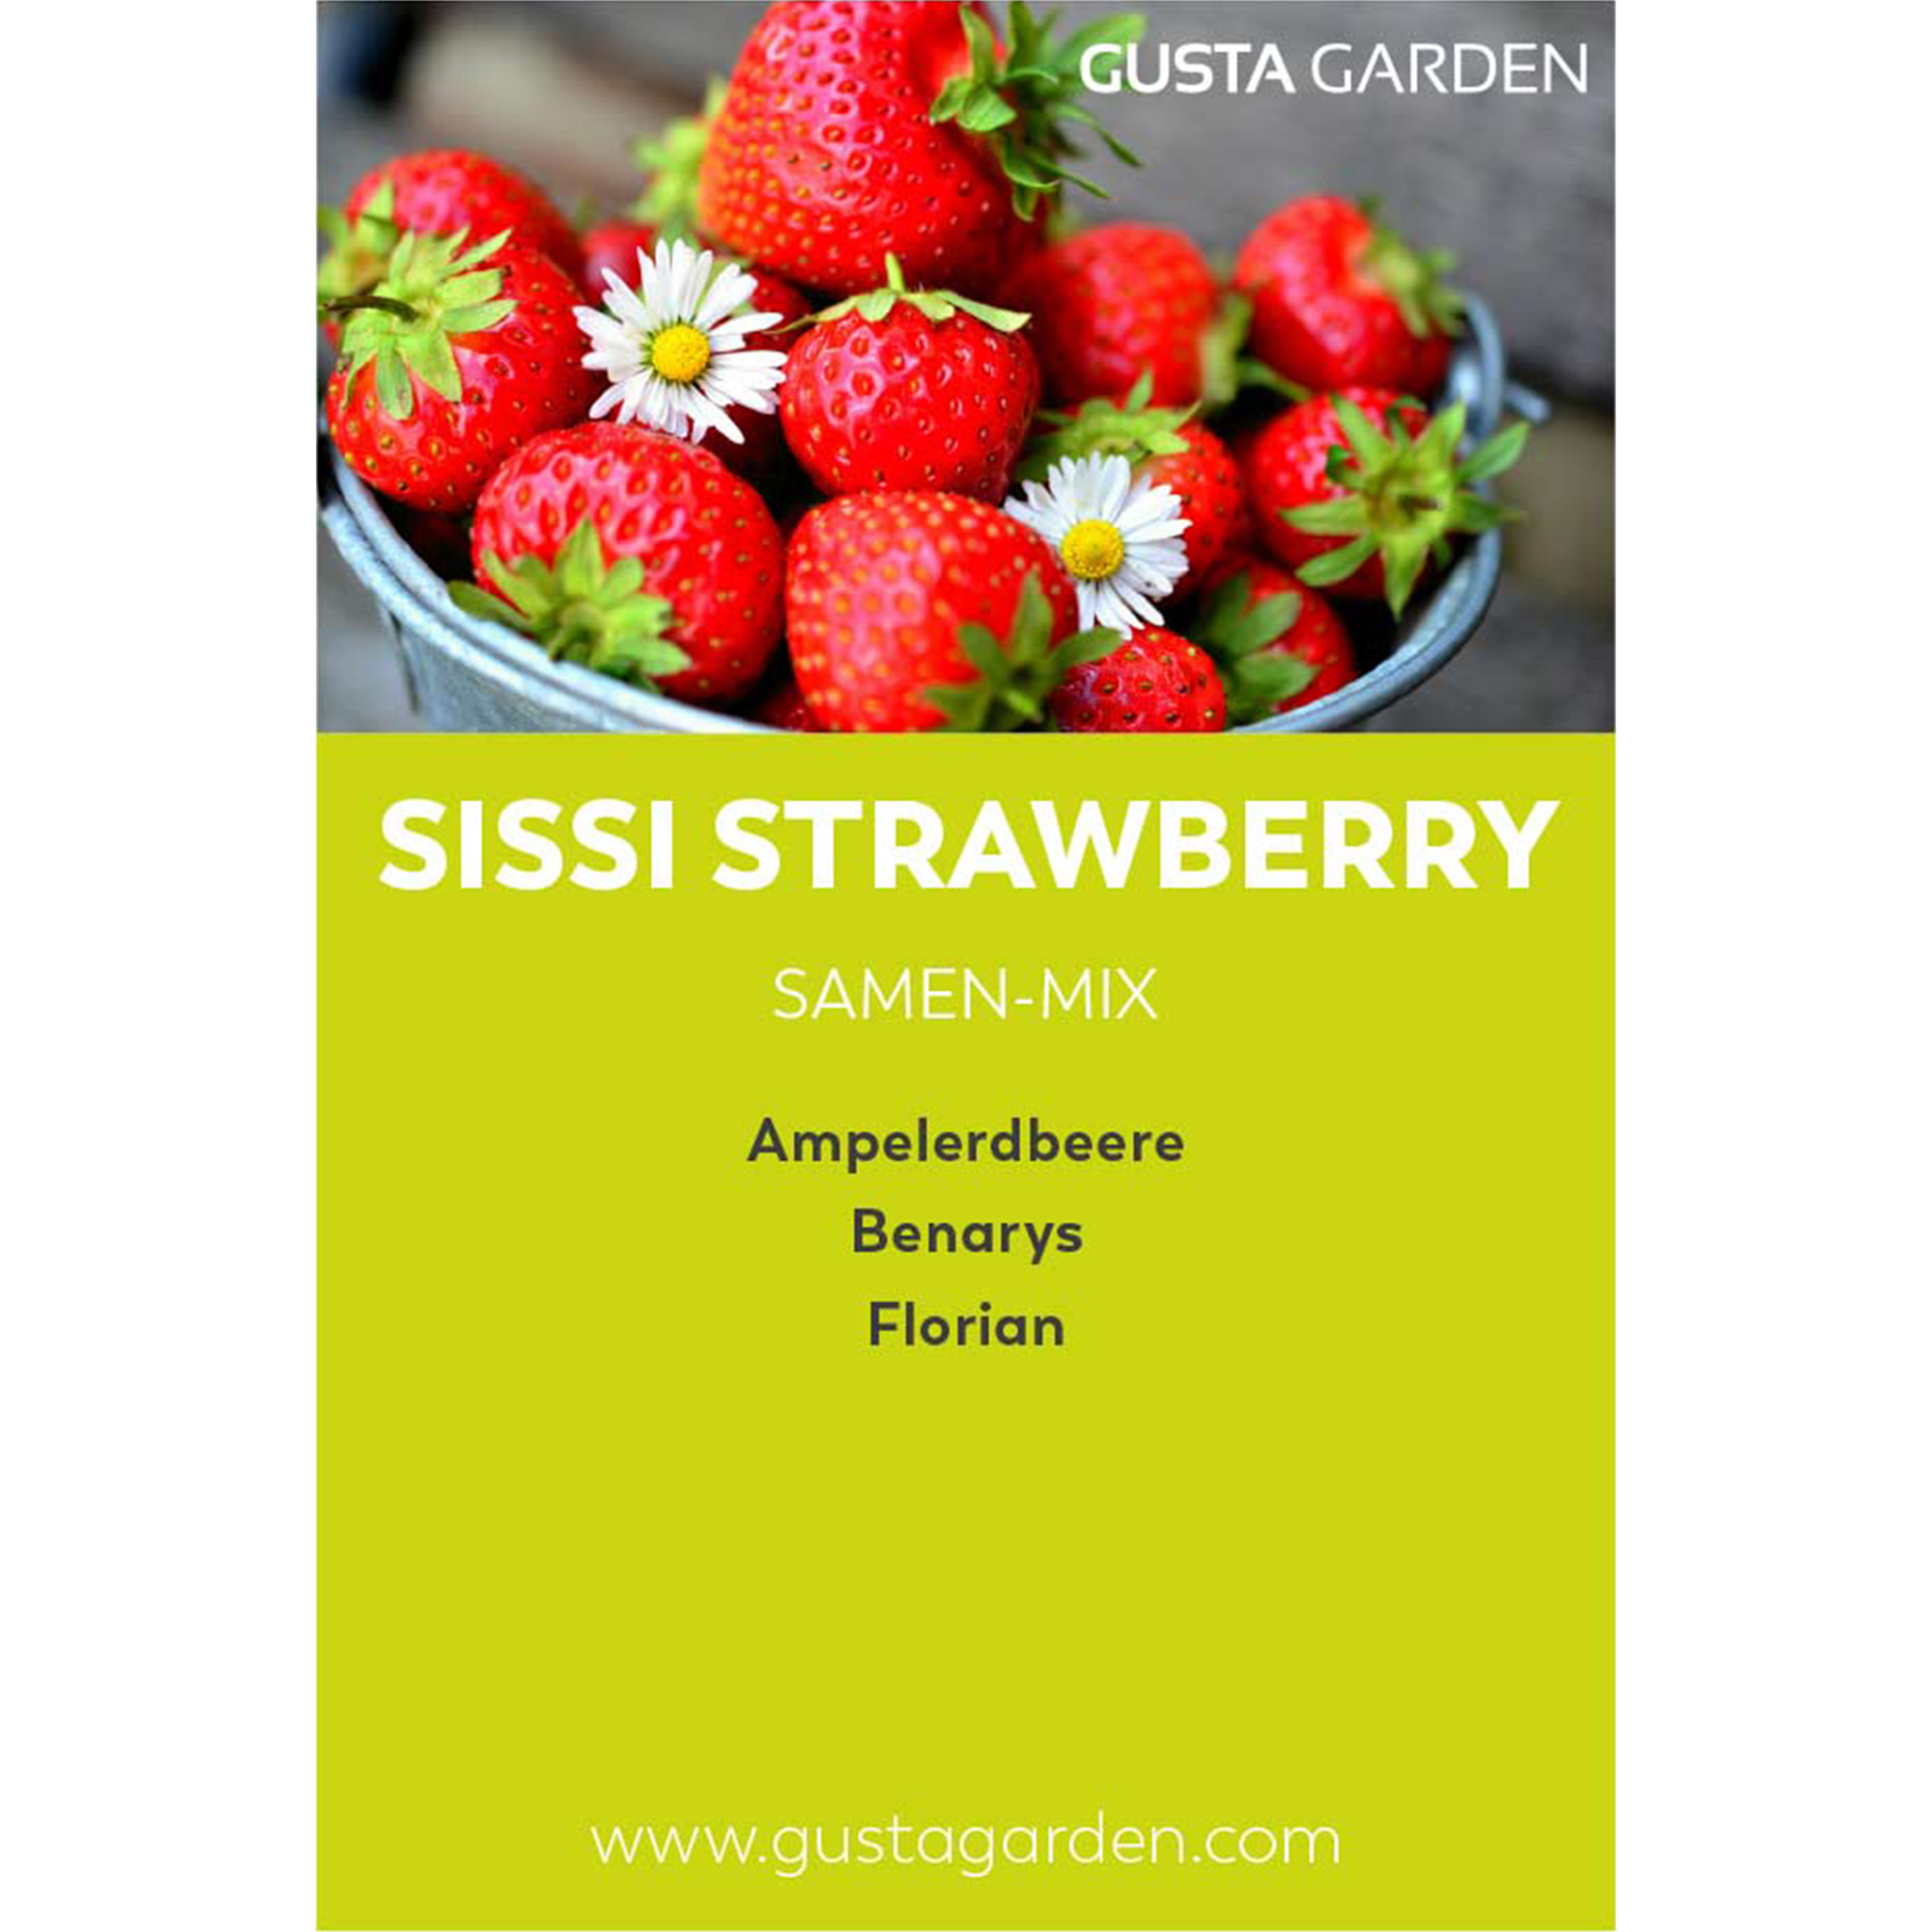 SISSI STRAWBERRY seed mix